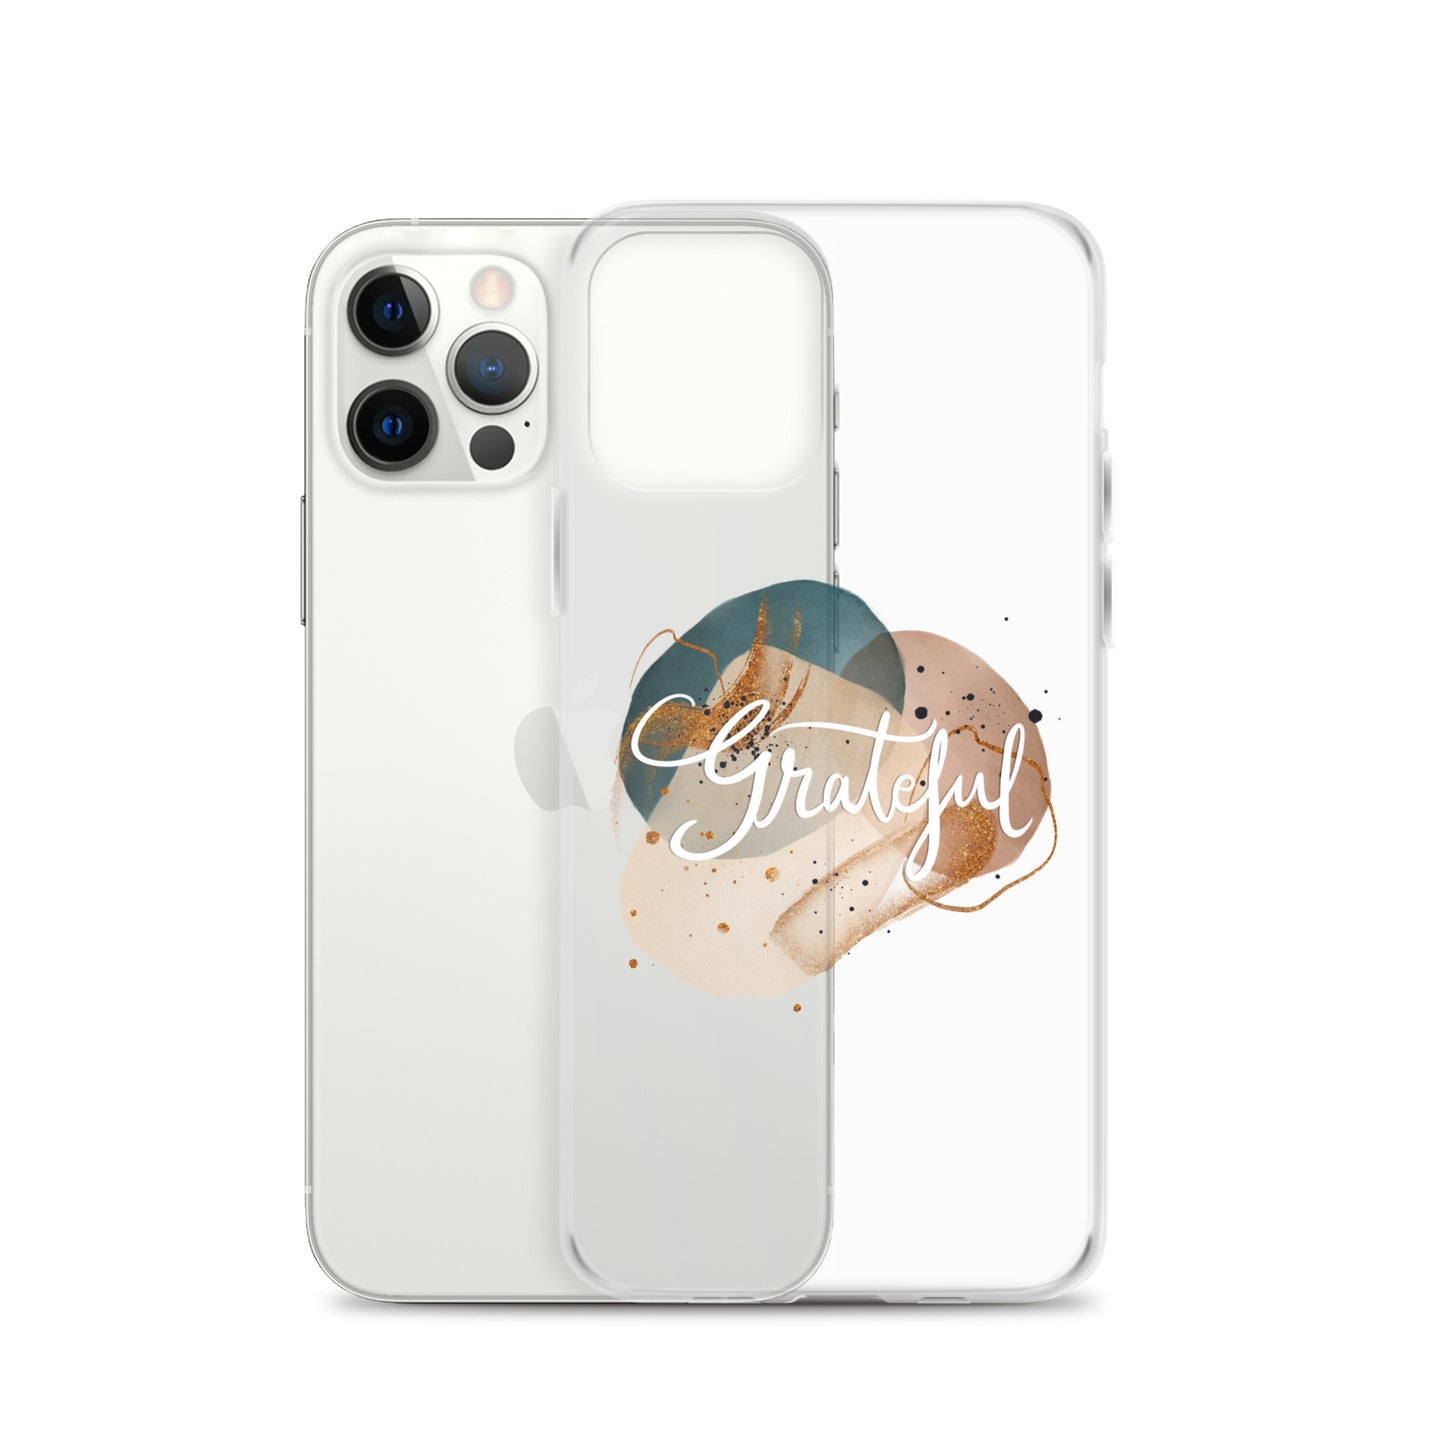 Clear Case for iPhone® "Grateful"